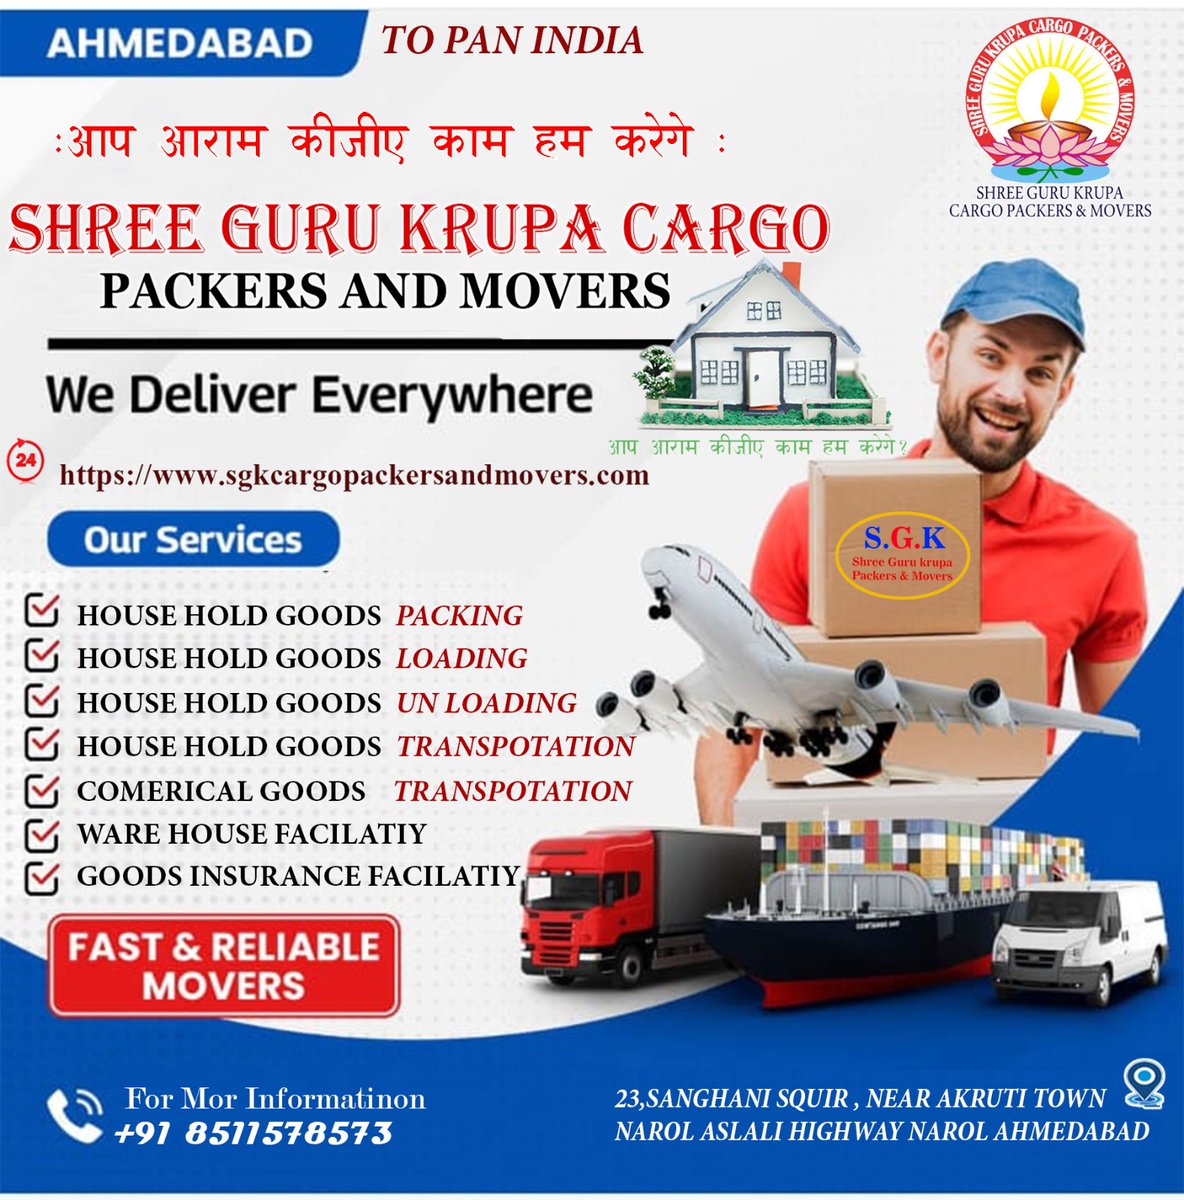 https://t.co/M7715G4K5K
Trust Movers And Packers Services 8511578573
Best Moving Company In AHMEDABAD
#Packers 
#movers 
#Transportation 
#homes
#relocation https://t.co/e1WOiiycjB